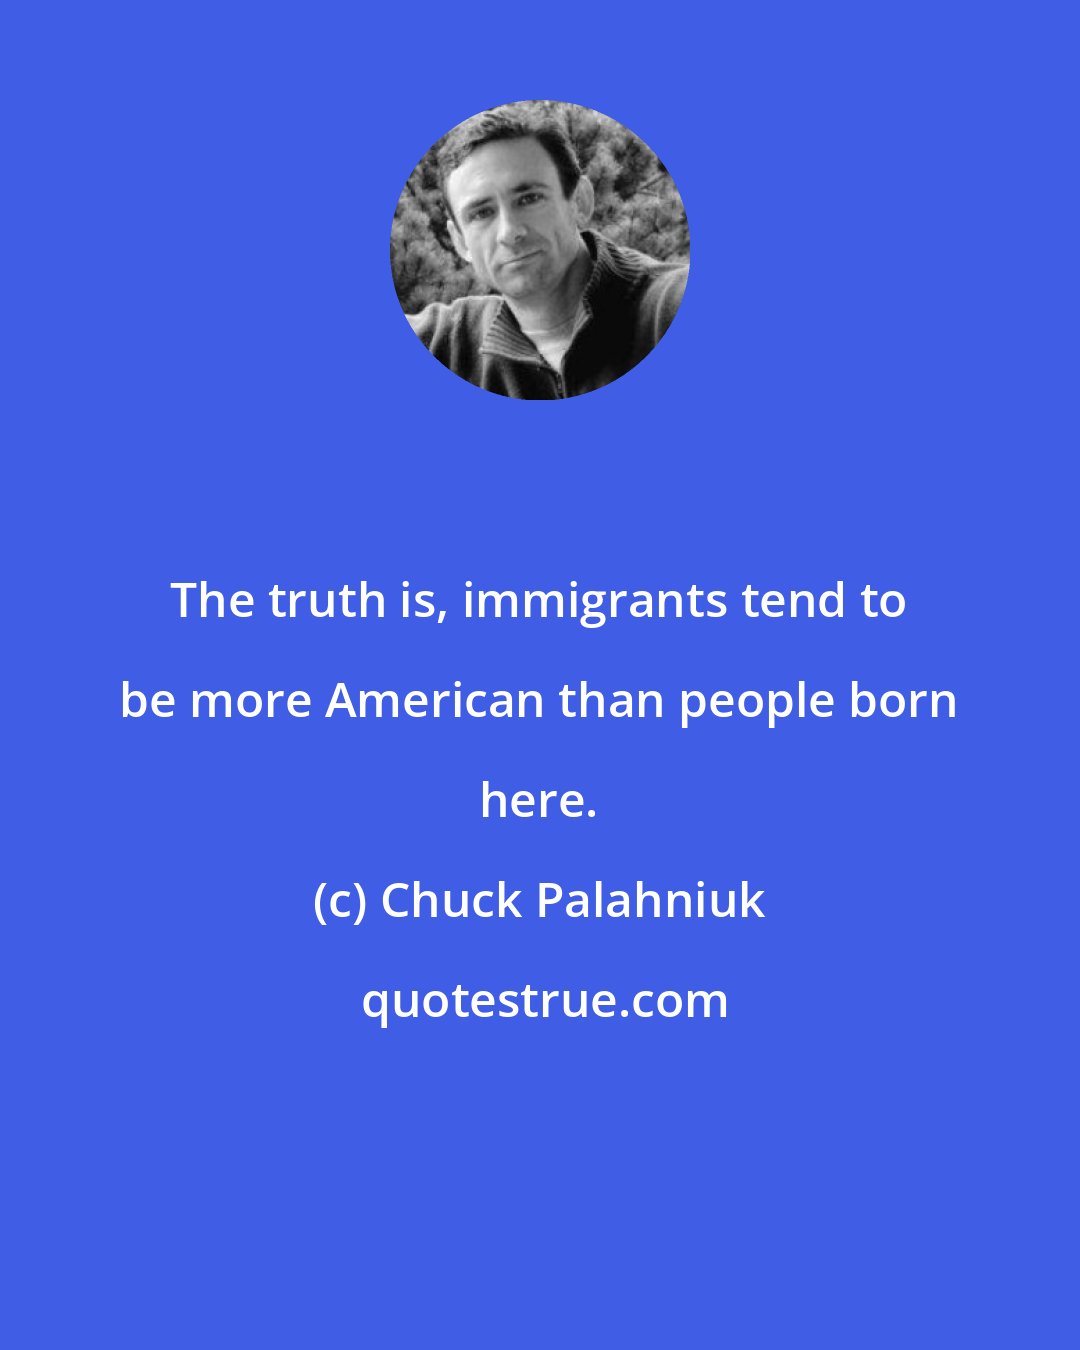 Chuck Palahniuk: The truth is, immigrants tend to be more American than people born here.